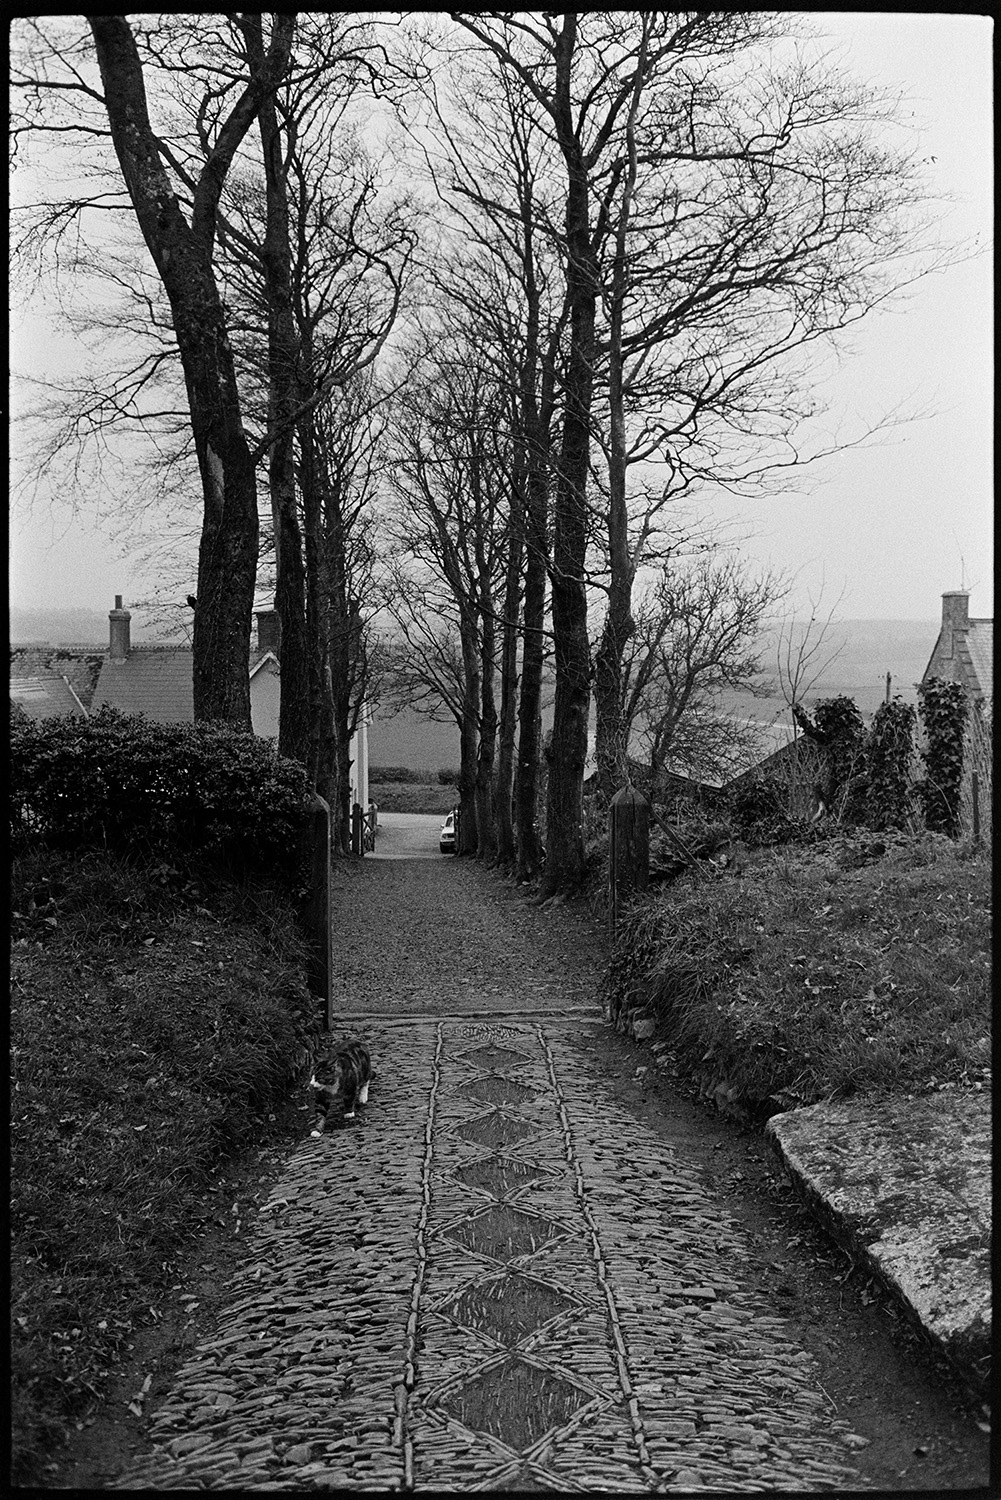 Cobbled church path. 
[A cat walking along the patterned cobbled path at Inwardleigh Church. Trees and houses are visible in the background.]